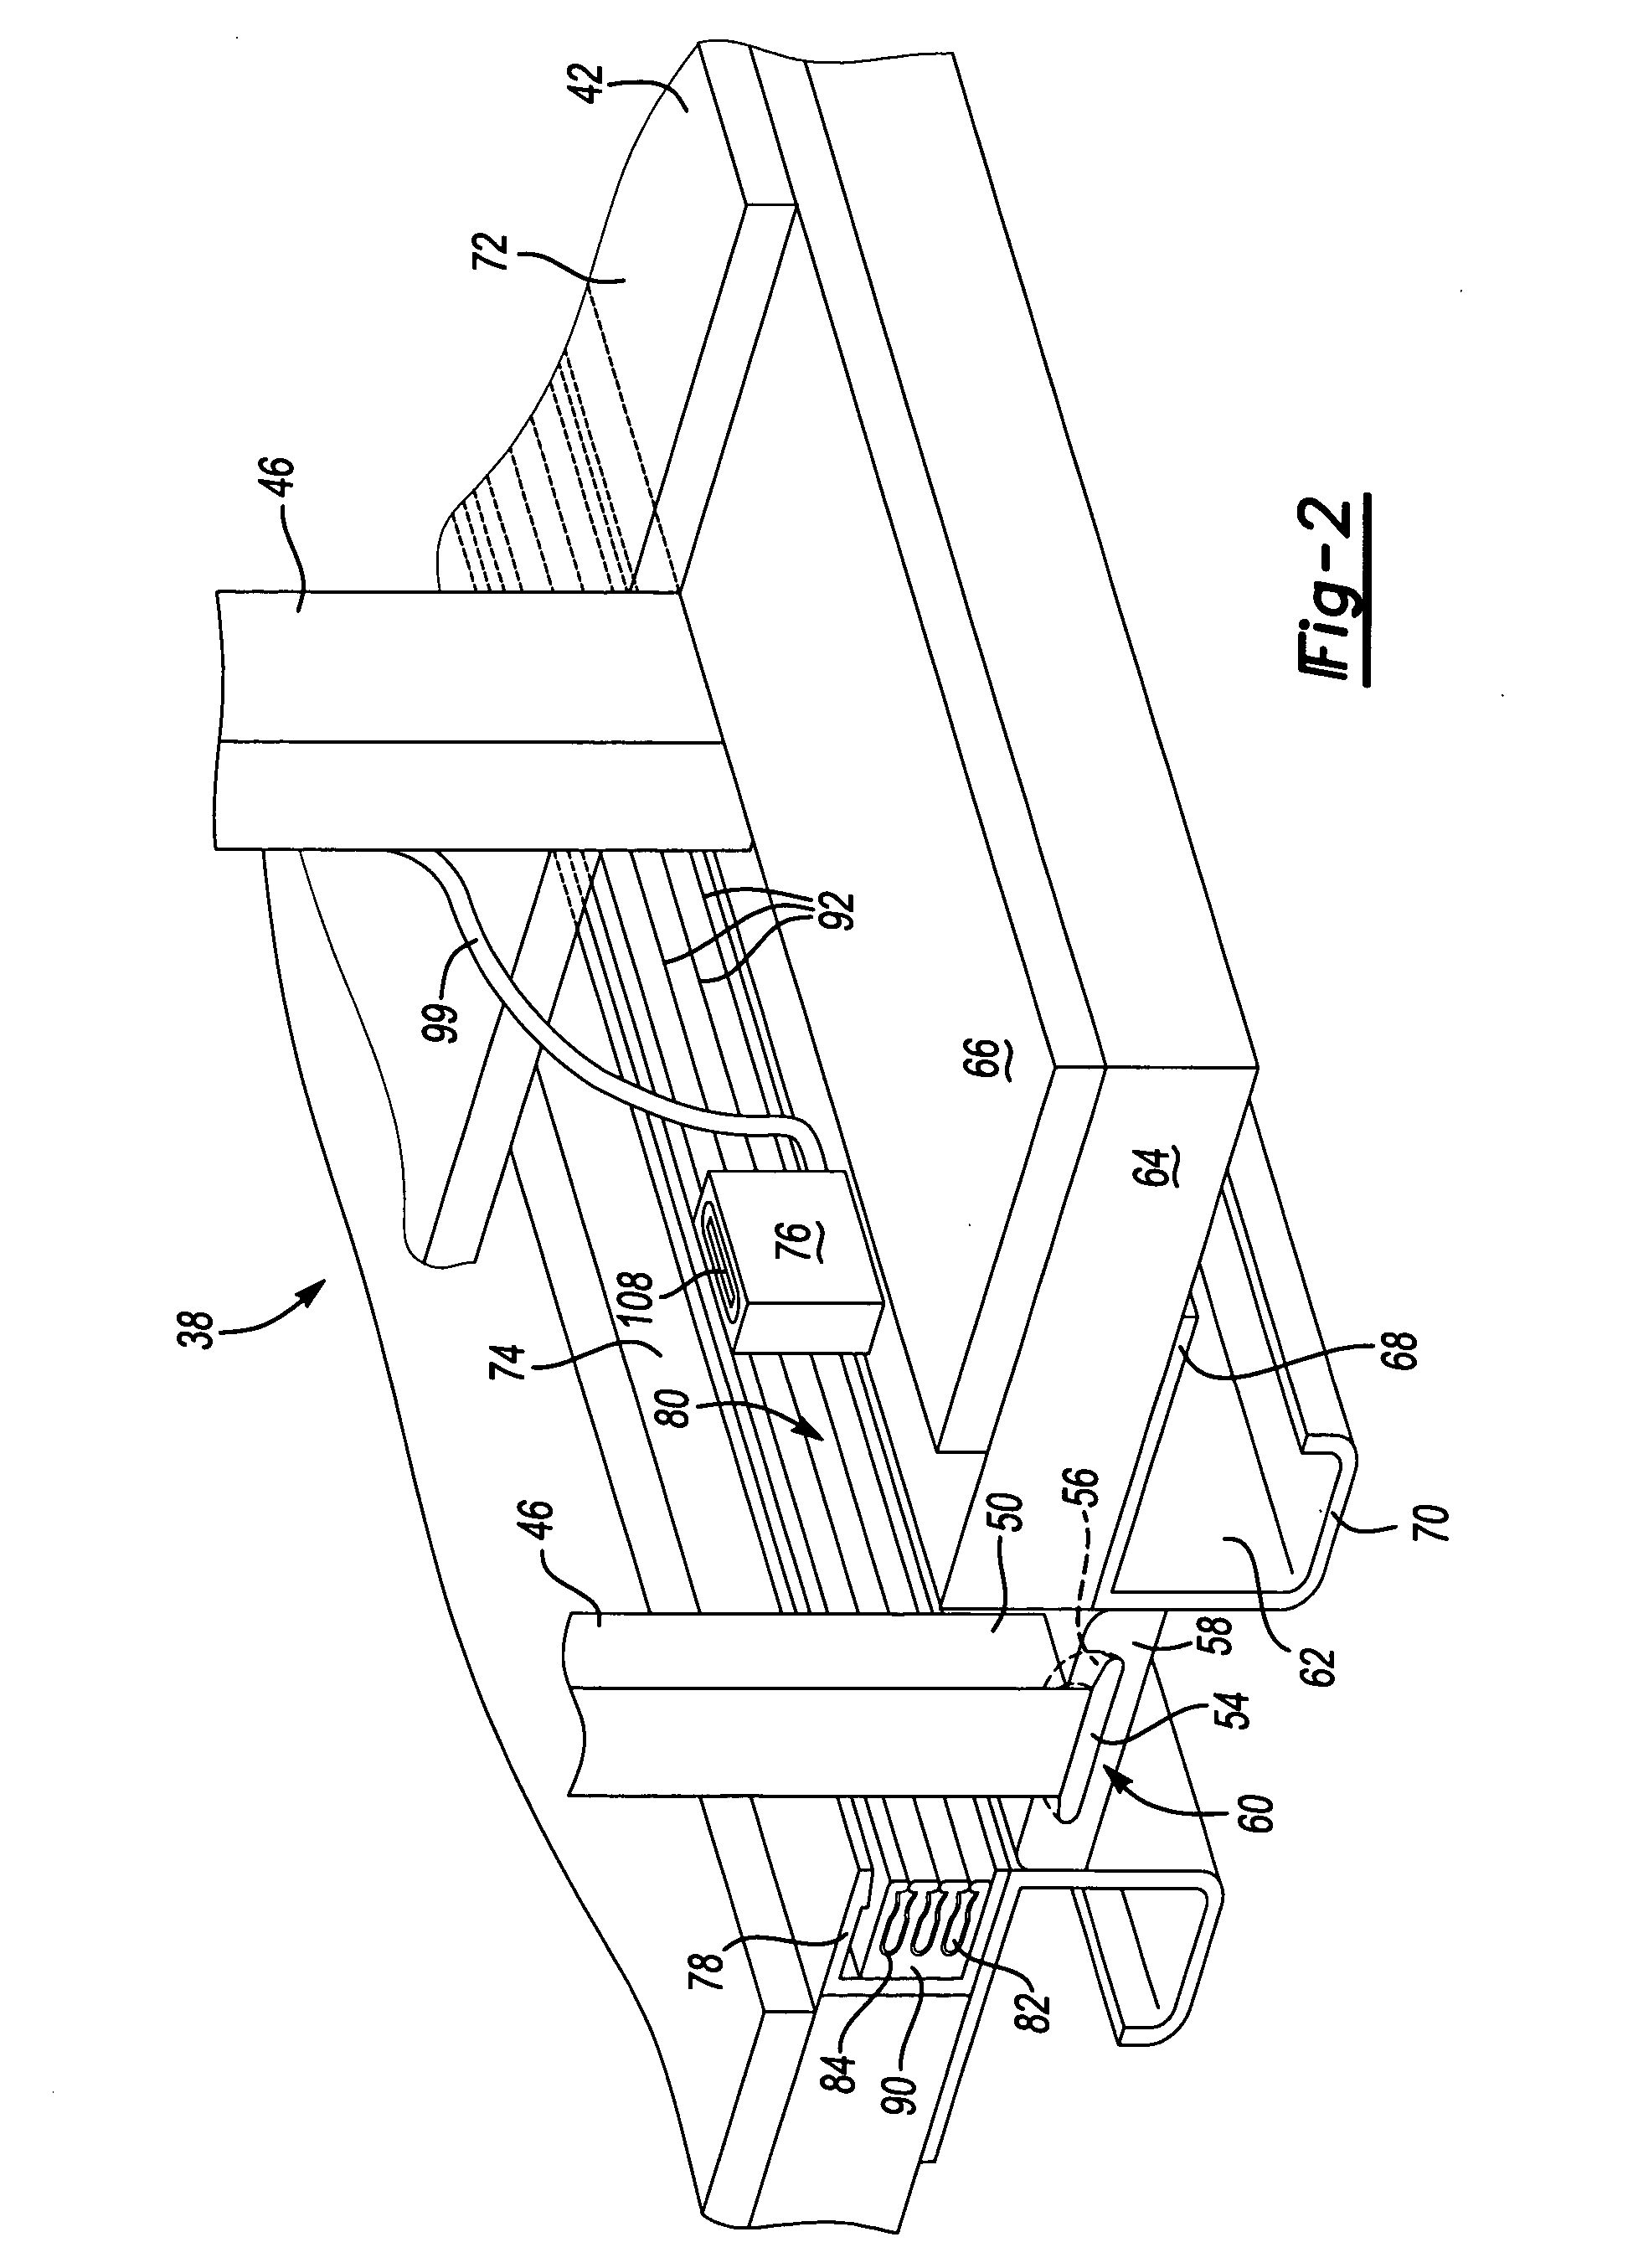 Continuous power bus for seat power